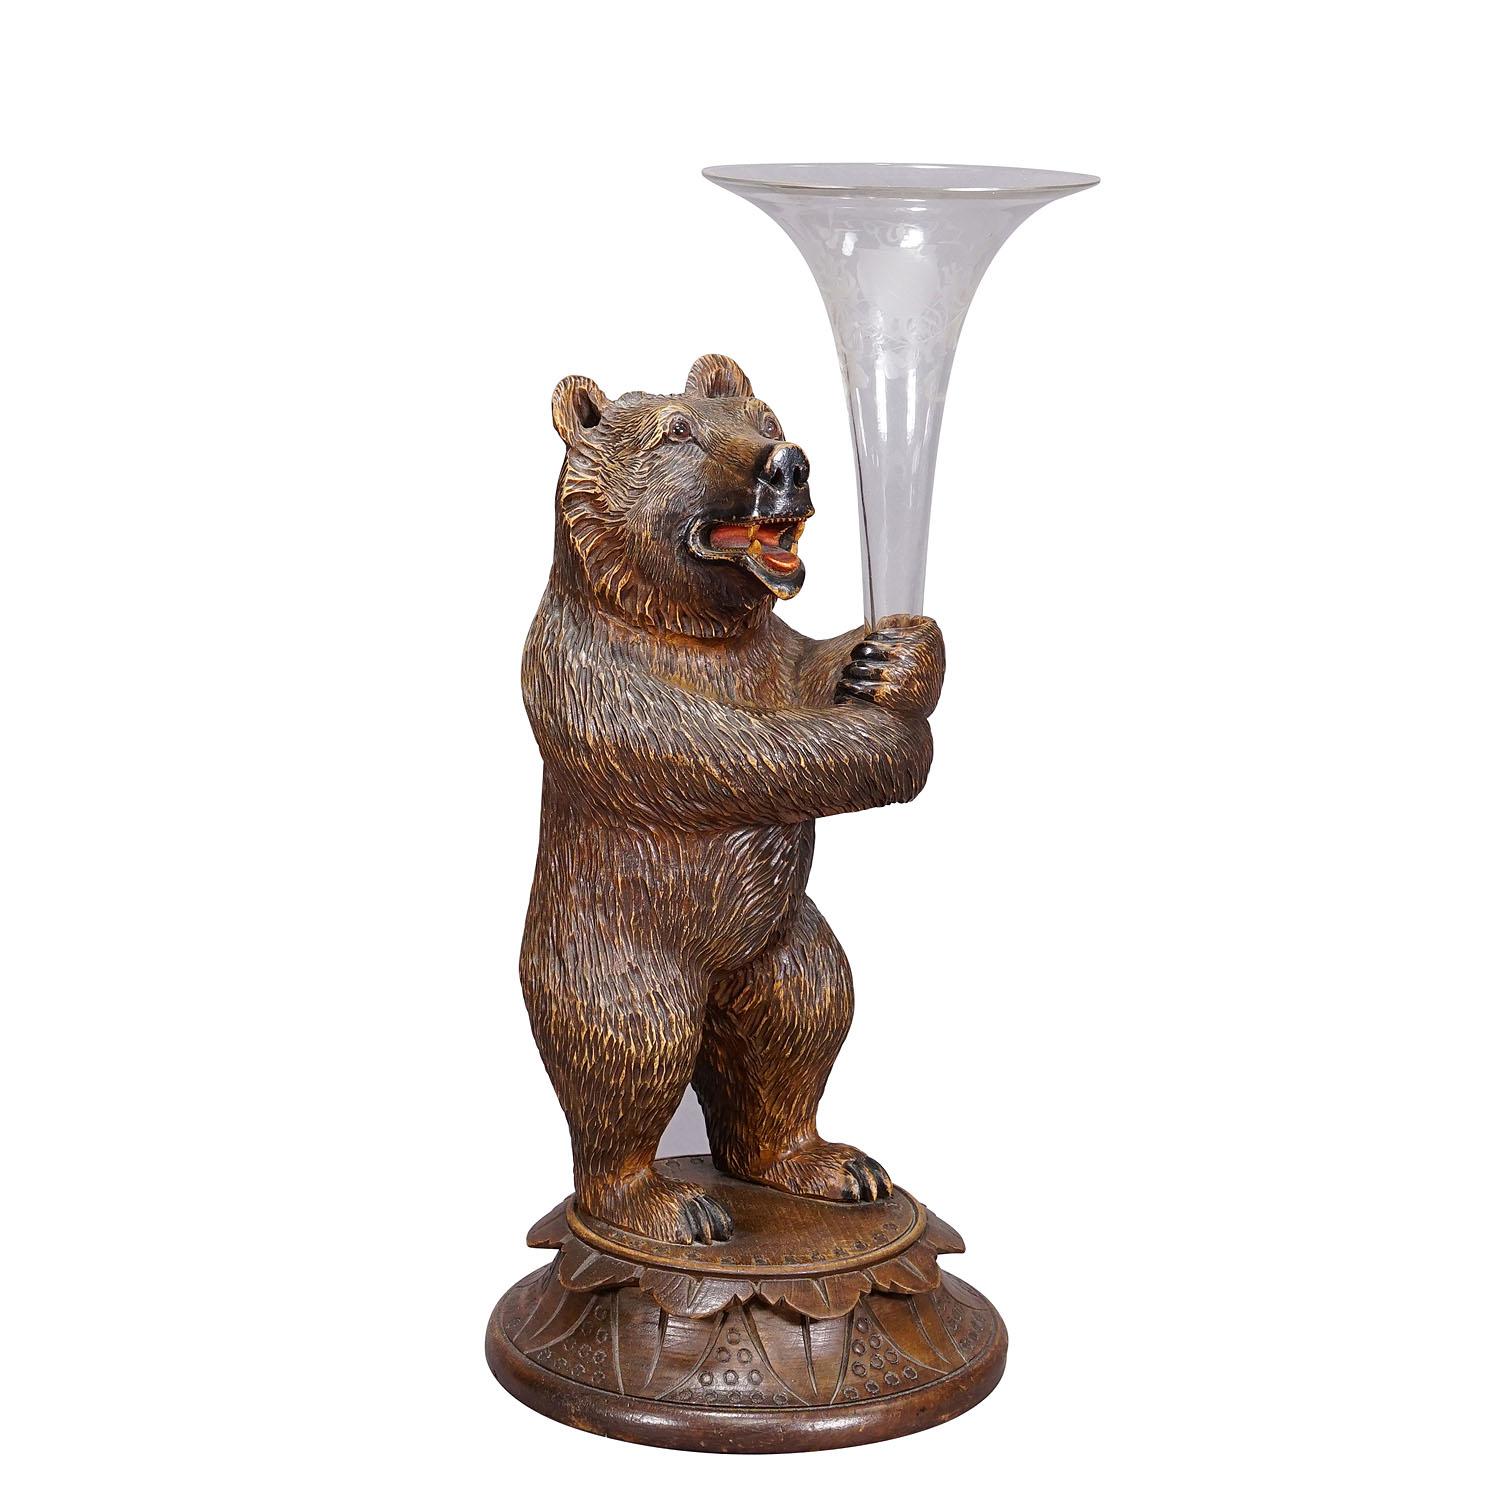 A Wooden Carved Black Forest Bear with Glass Vase
Item e7275
A nicely carved Black Forest bear holding a glass vase in its hands. Executed in Brienz, Switzerland around 1920. Very good condition. Heigt of the bear: 11.8' inches (30 cm). A great